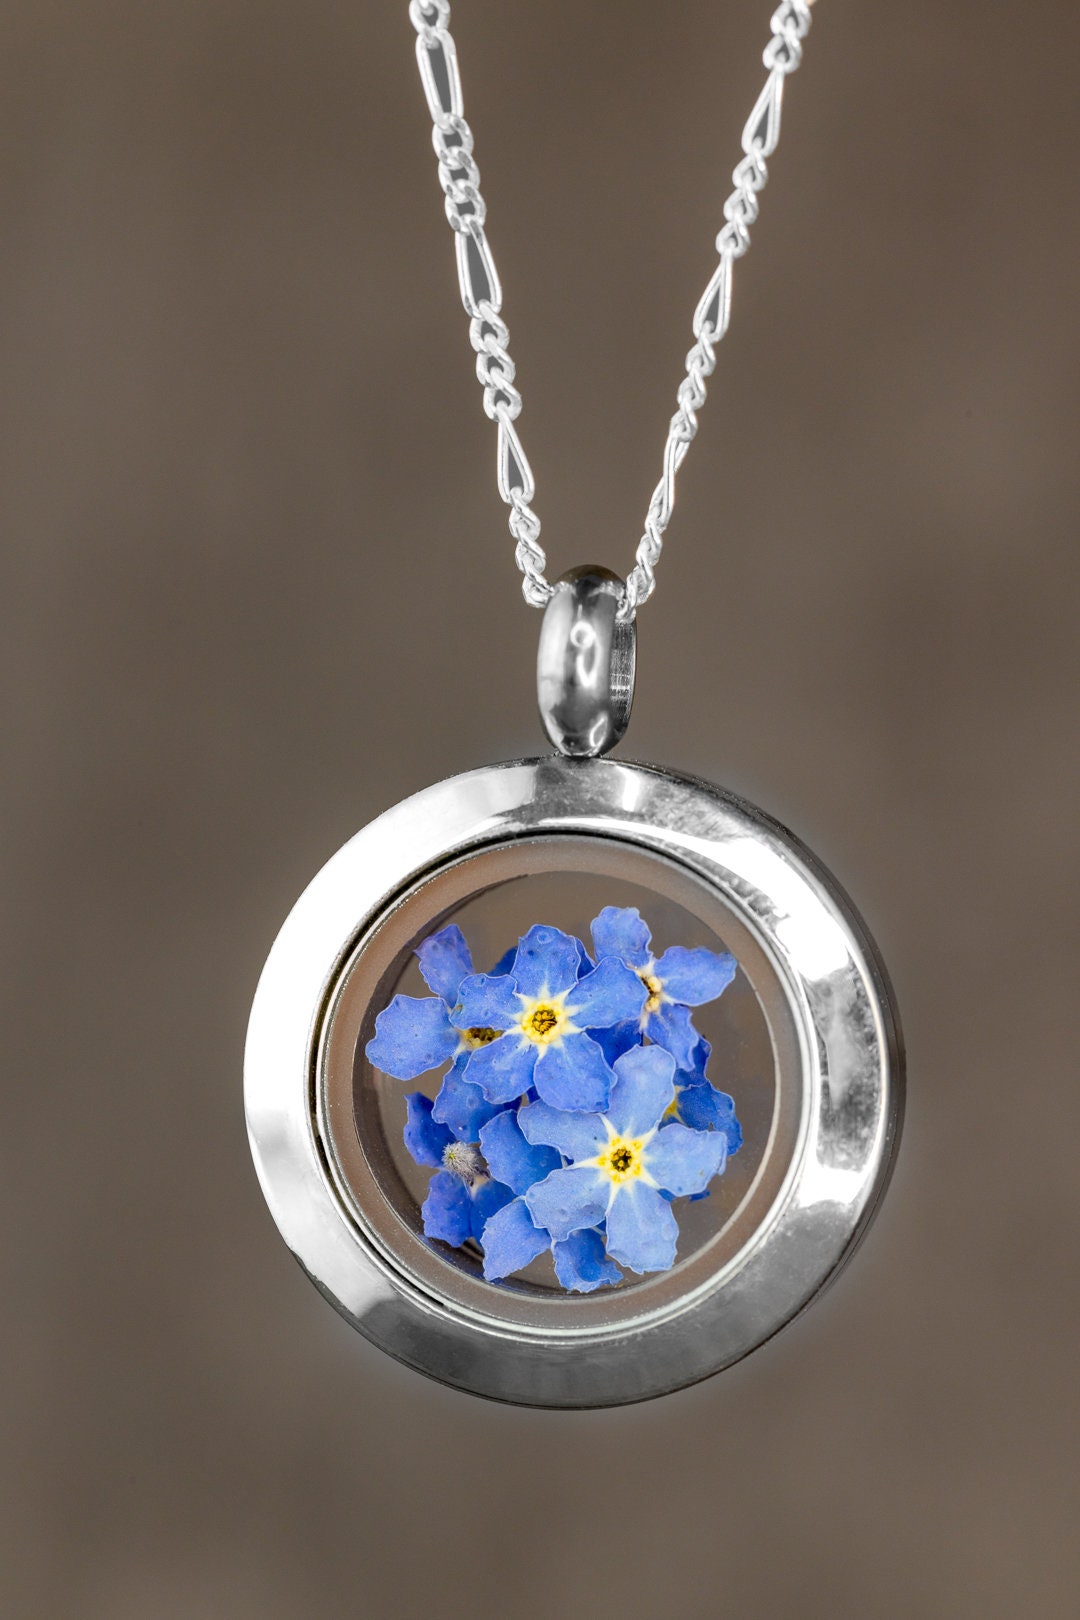 Forget-me-not flowers medallion - glass medallion with genuine flowers 925 sterling silver necklace - K925-134